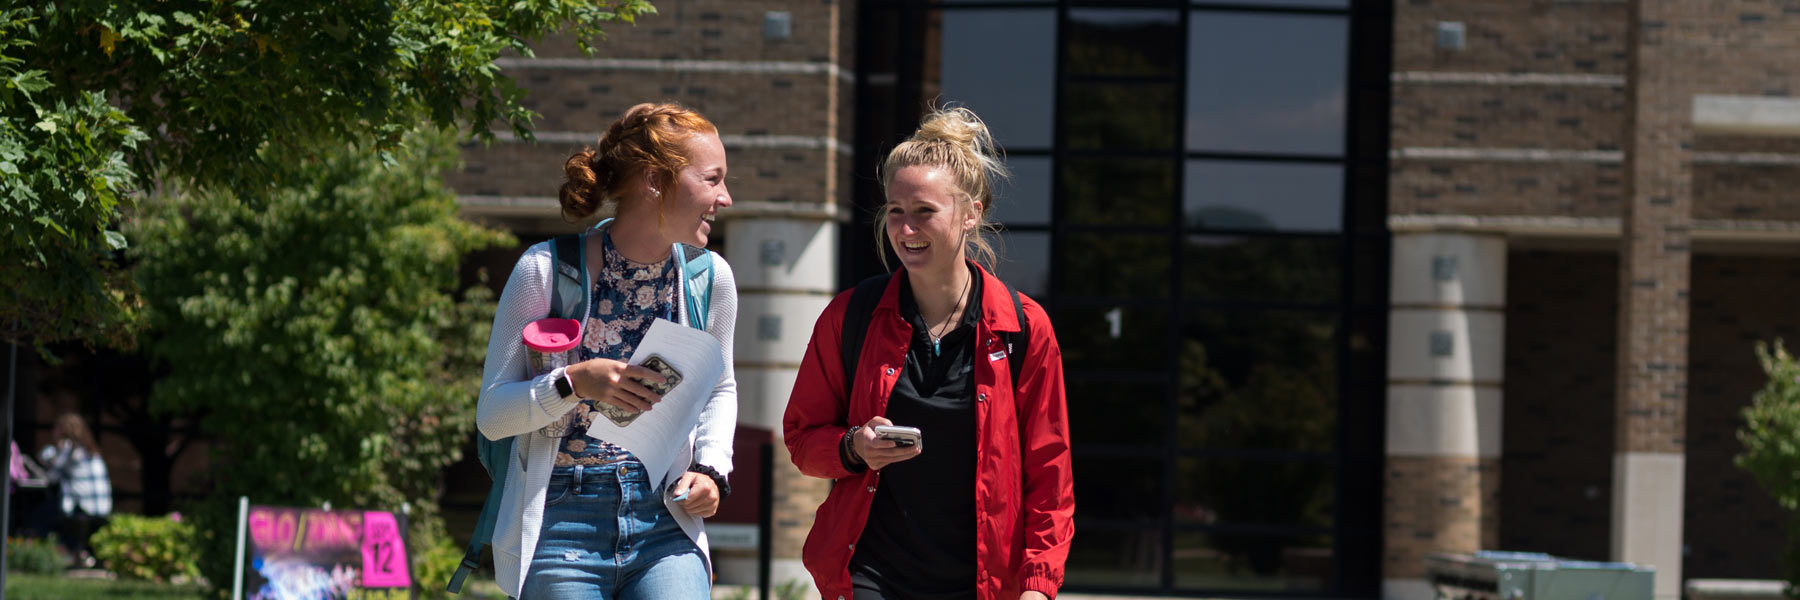 Two students smiling and laughing together while walking on-campus.